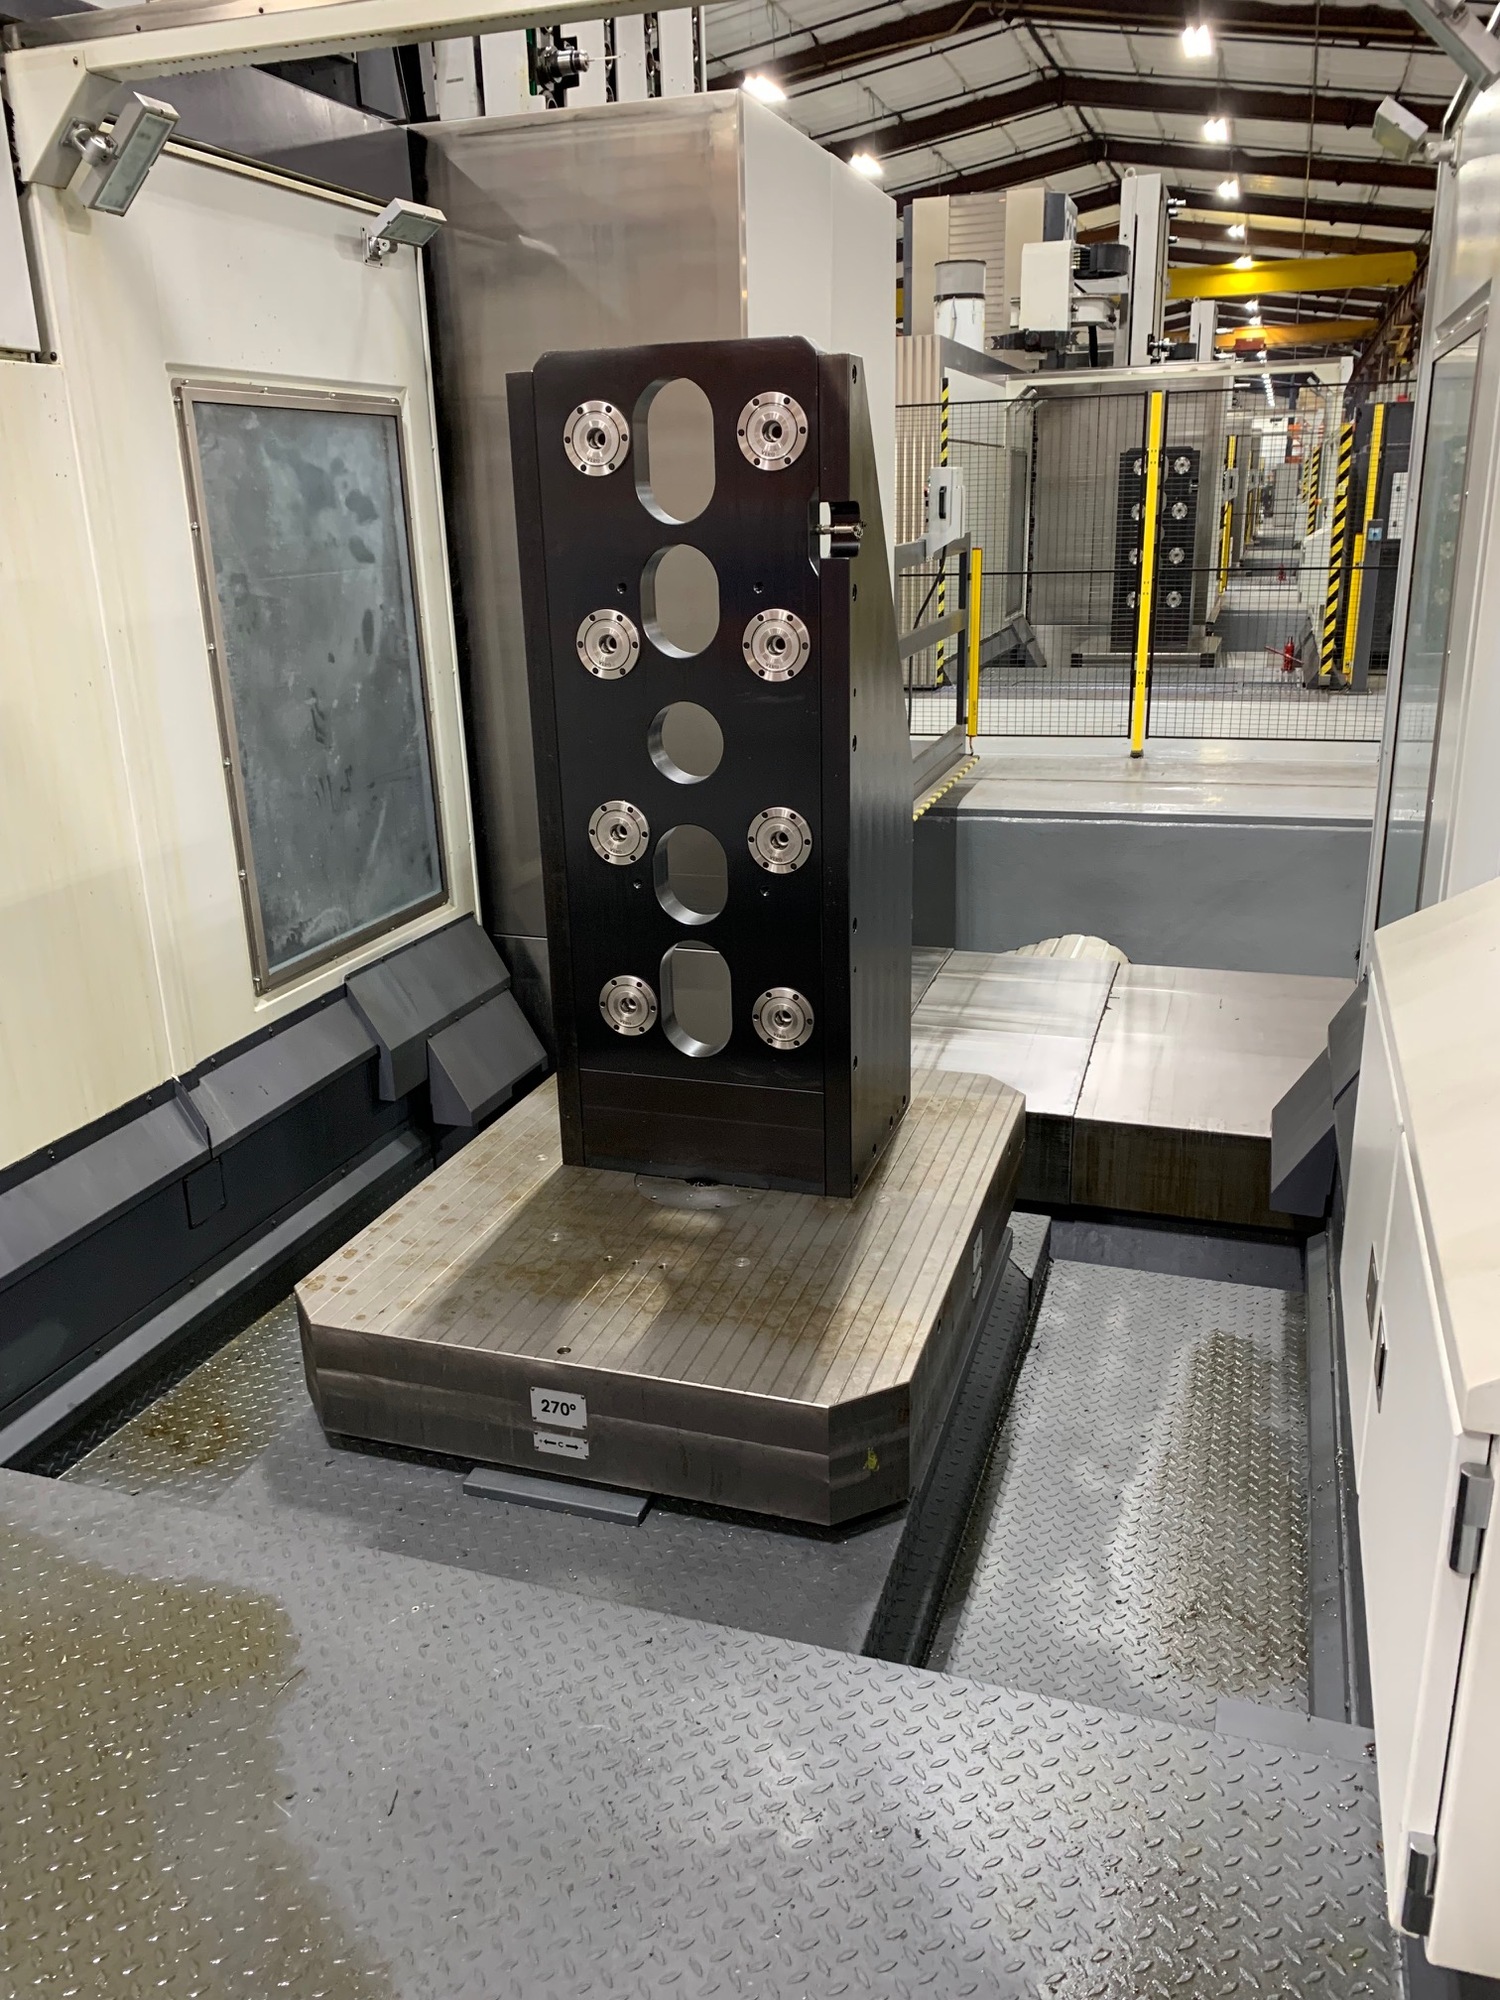 2018 CORREA AXIA 85 Vertical Machining Centers (5-Axis or More) | Silverlight CNC, Inc